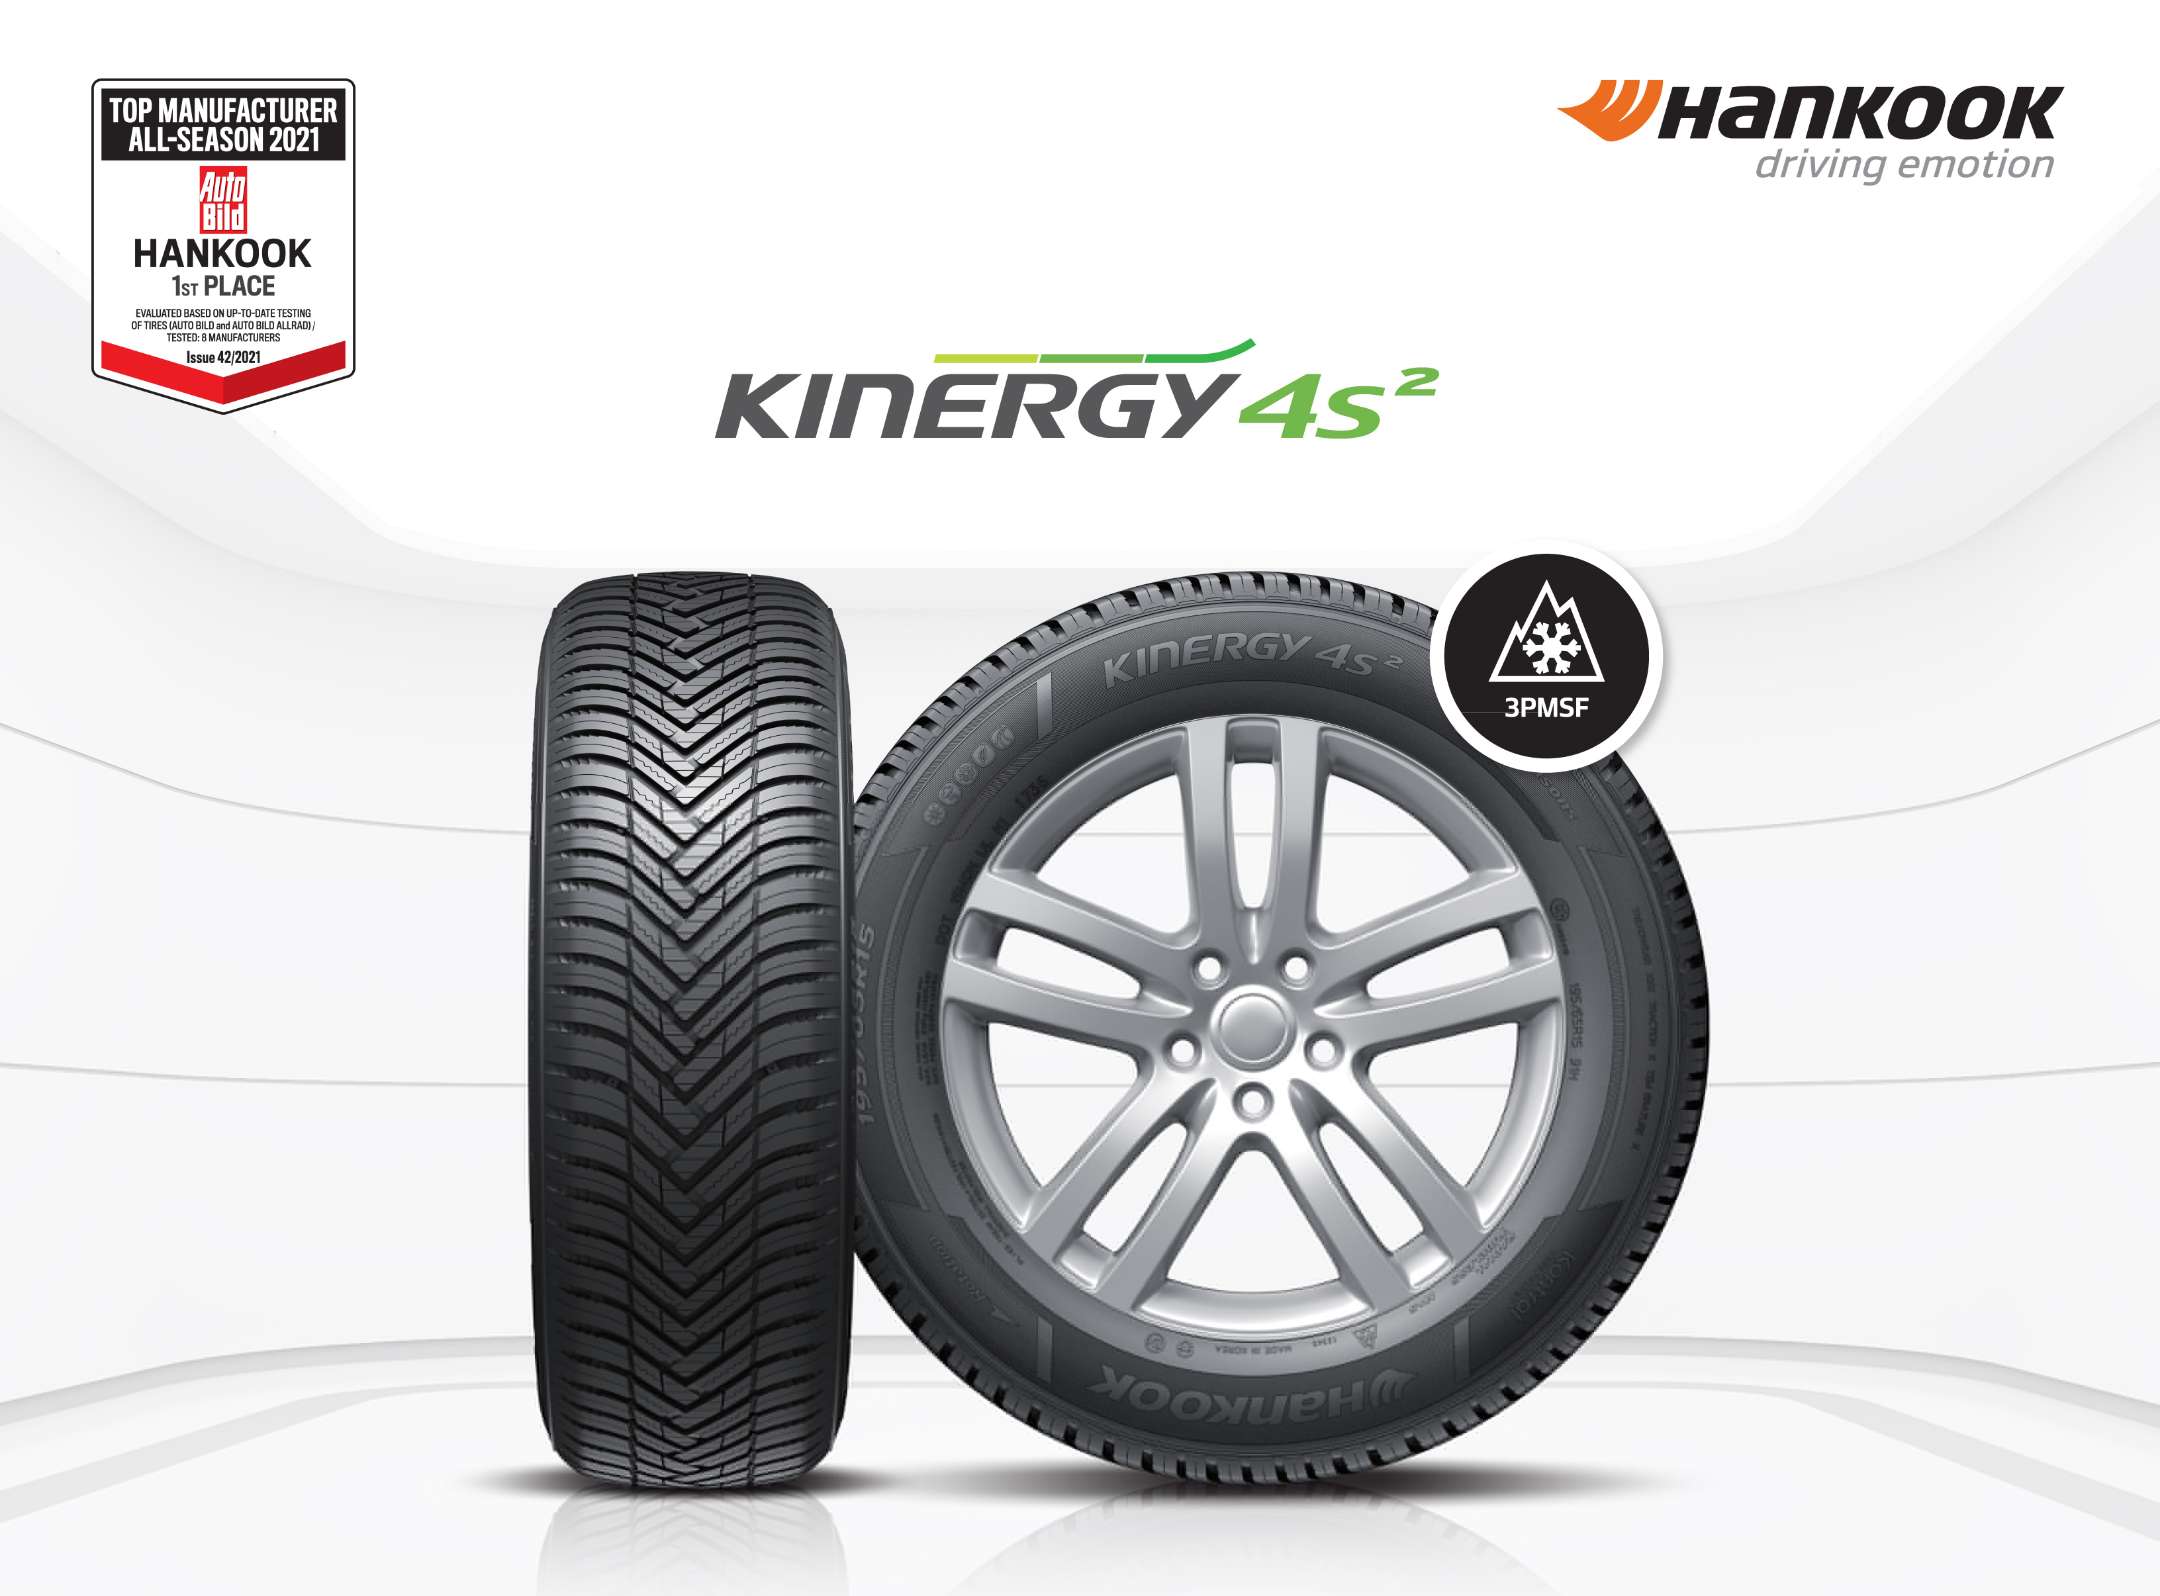 Hankook Tire & Technology-Technology in Motion-Kinergy 4S2X Responds to the calls of the market-9